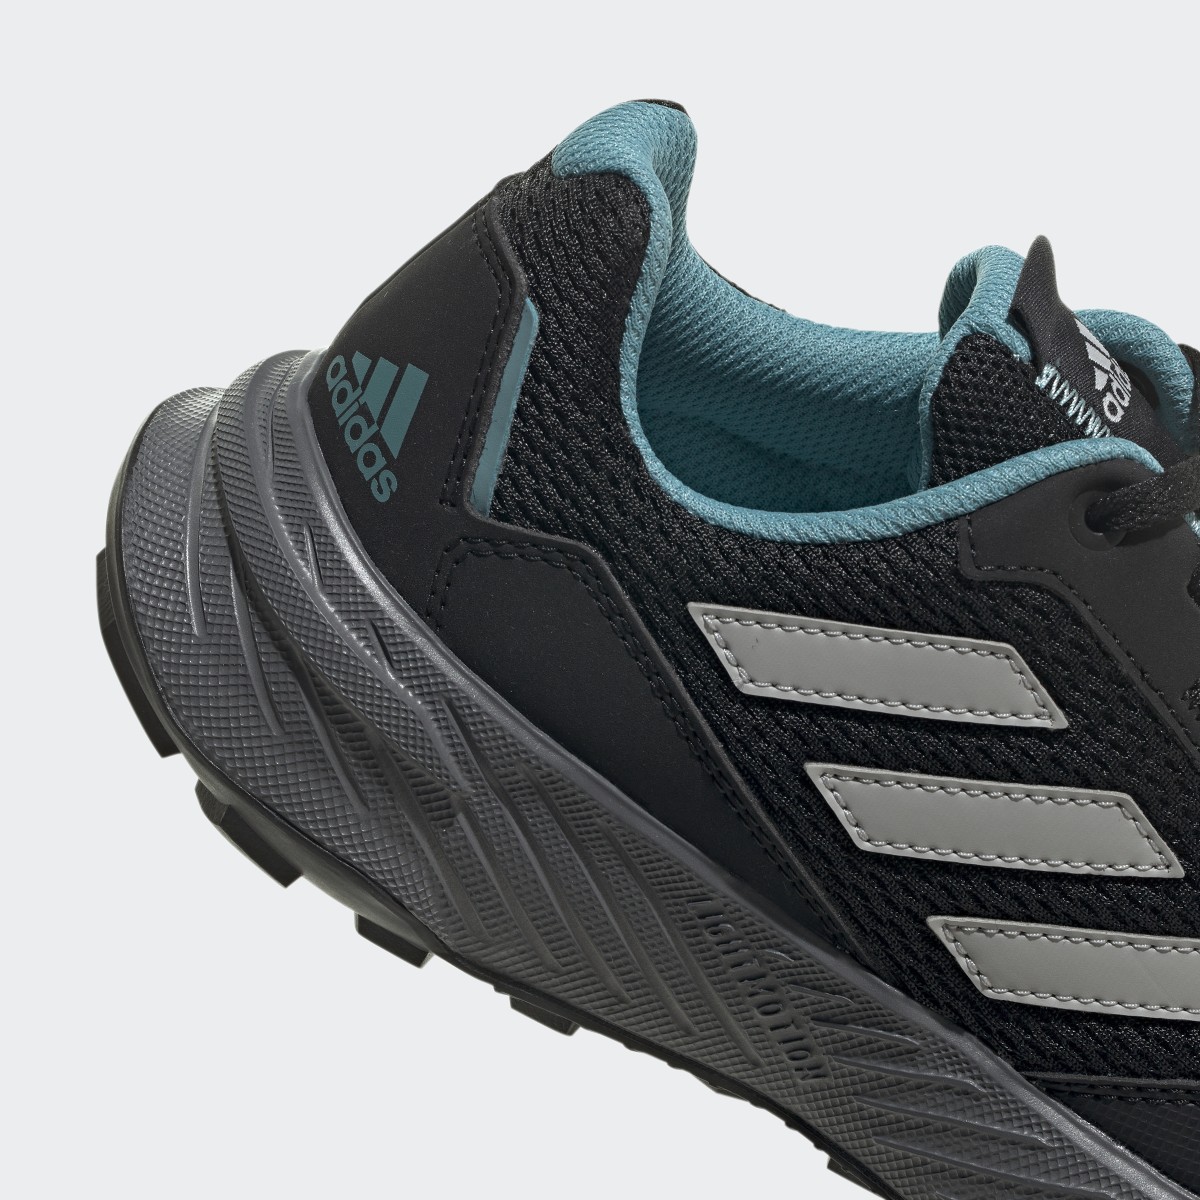 Adidas Tracefinder Trail Running Shoes. 9